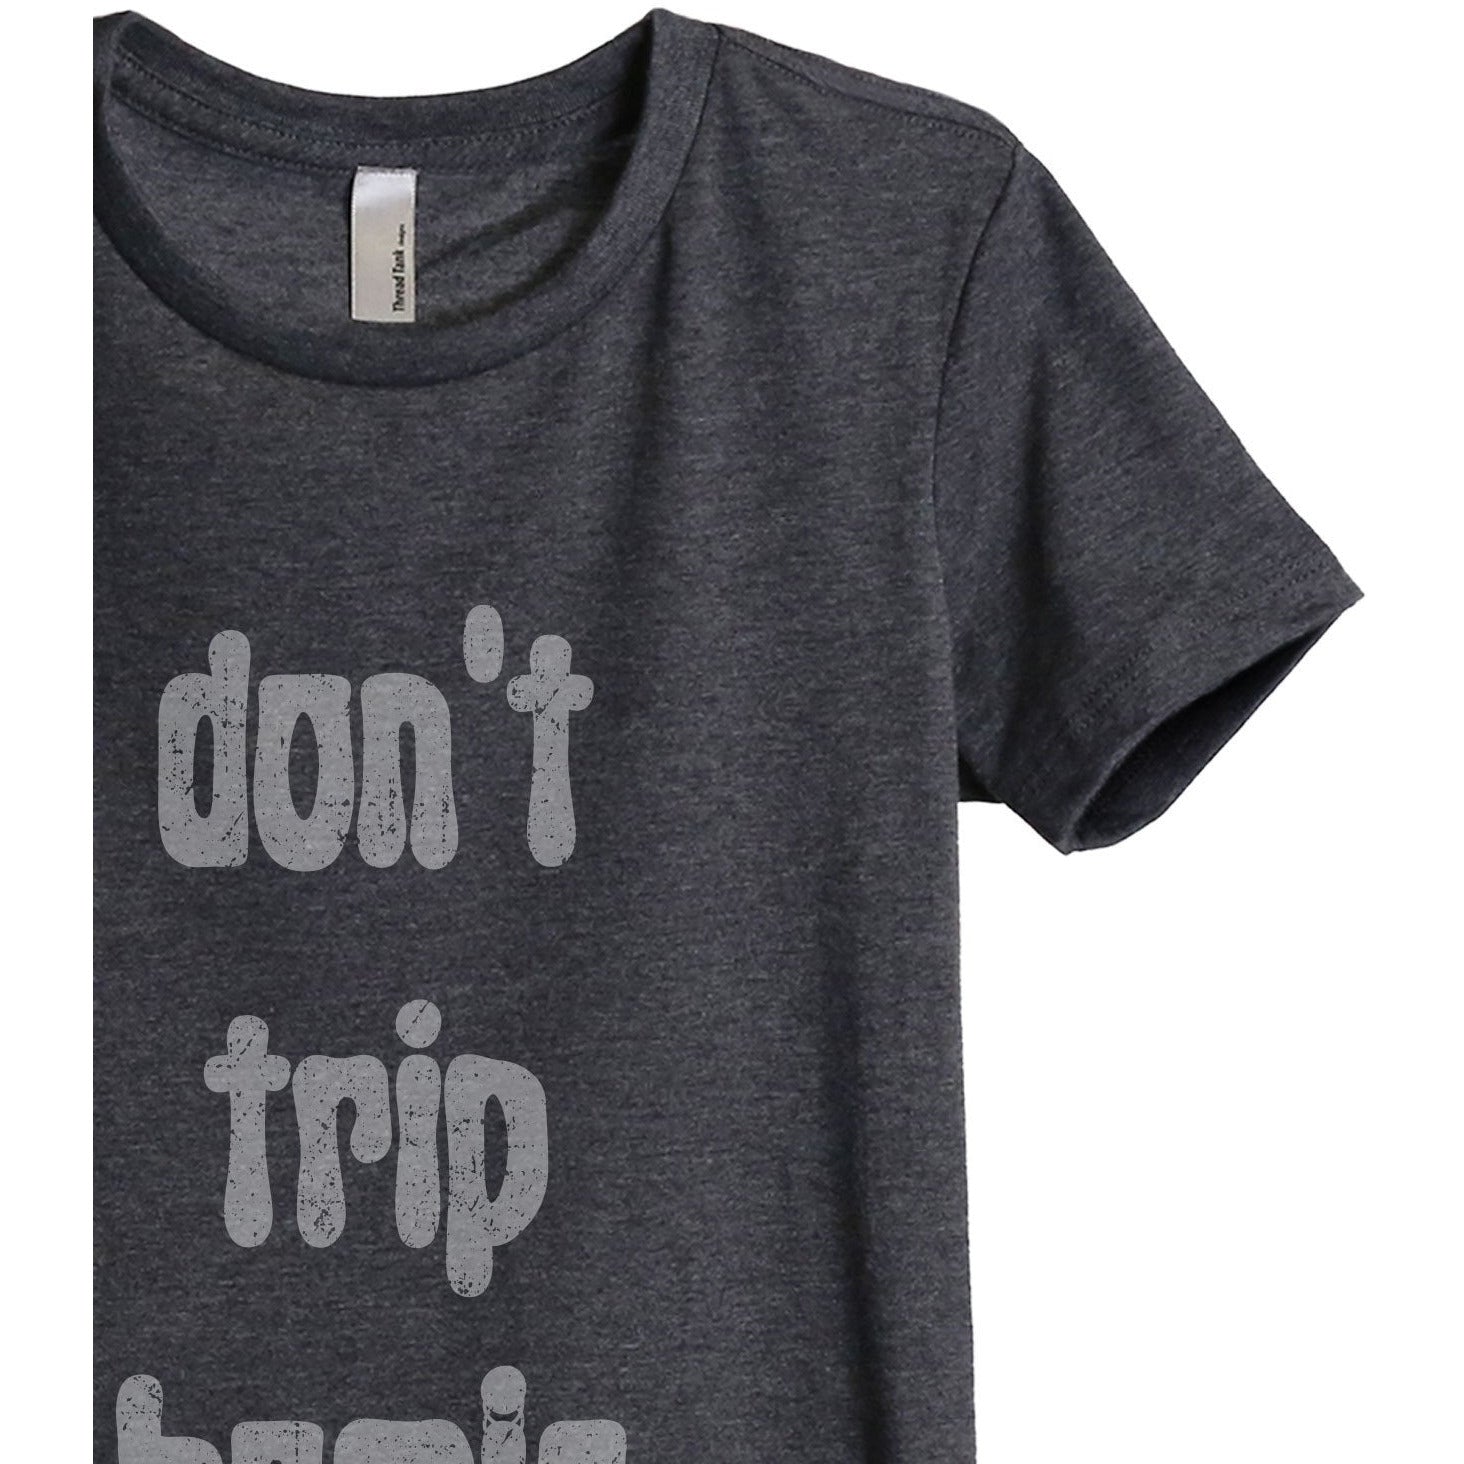 Don't Trip Homie Women's Relaxed Crewneck T-Shirt Top Tee Charcoal Grey Zoom Details